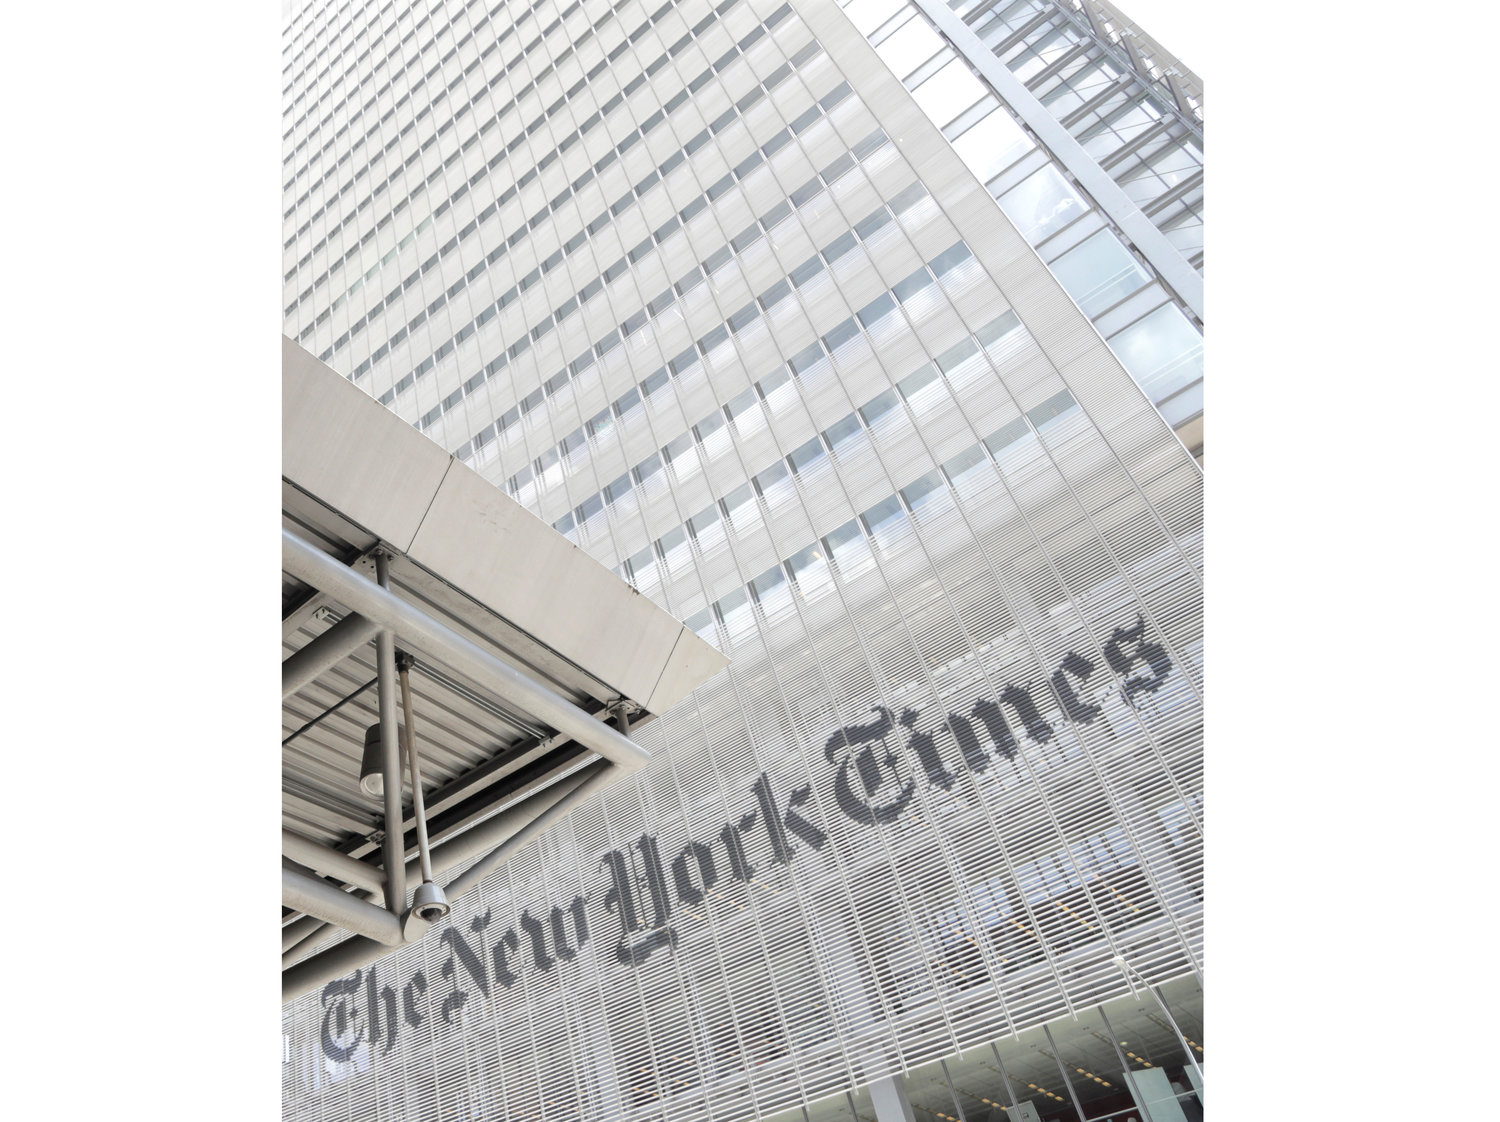 This June 22, 2019 file photo shows the exterior of the New York Times building in New York. The New York Times says it was wrong to trust the story of a Canadian man whose claims of witnessing and participating in atrocities as a member of the Islamic State was a central part of its award-winning 2018 podcast "Caliphate." The 12-part series had won a Peabody Award and was a Pulitzer Prize finalist.